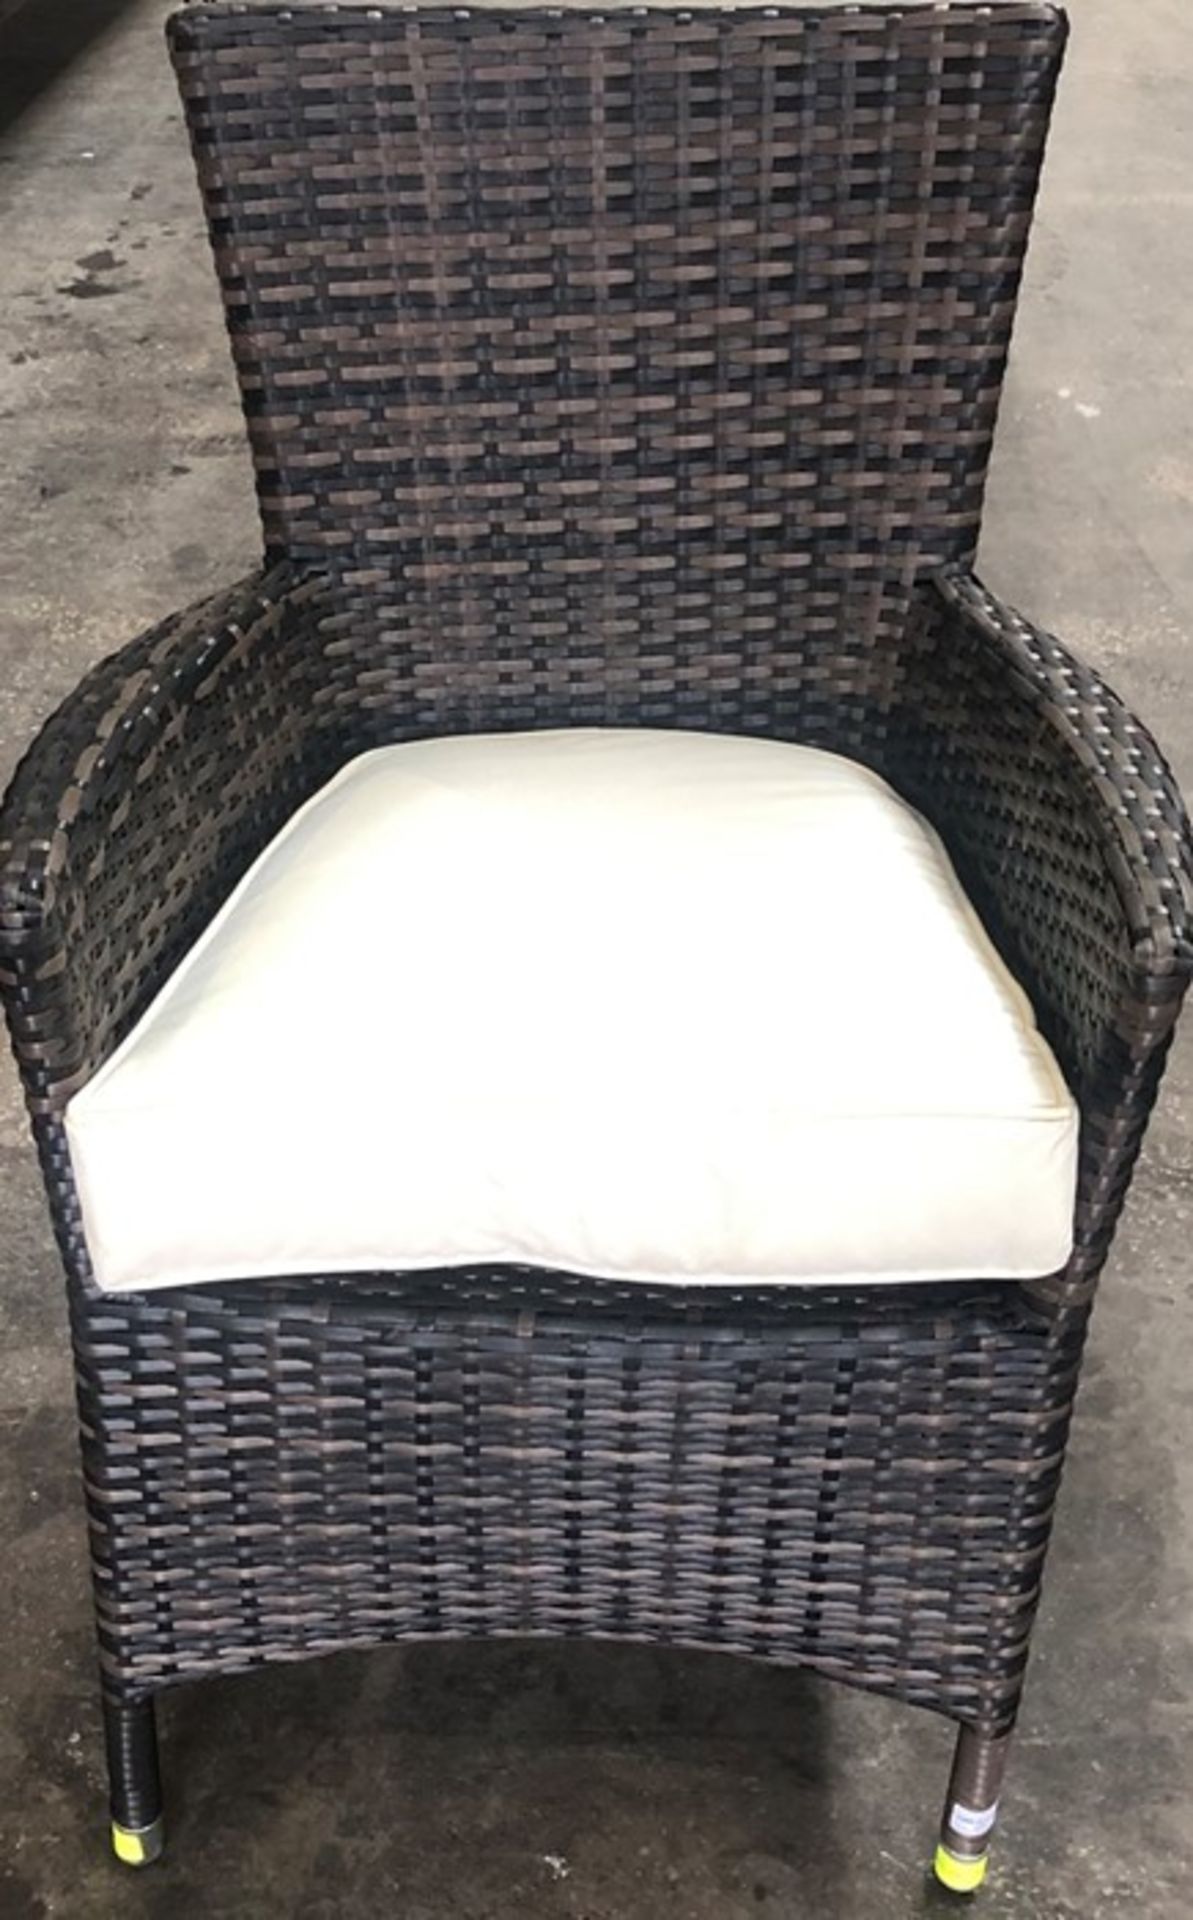 MIXED BROWN RATTAN OUTDOOR DINING CHAIR (PUBLIC VIEWING AVAILABLE/RECOMMENDED)